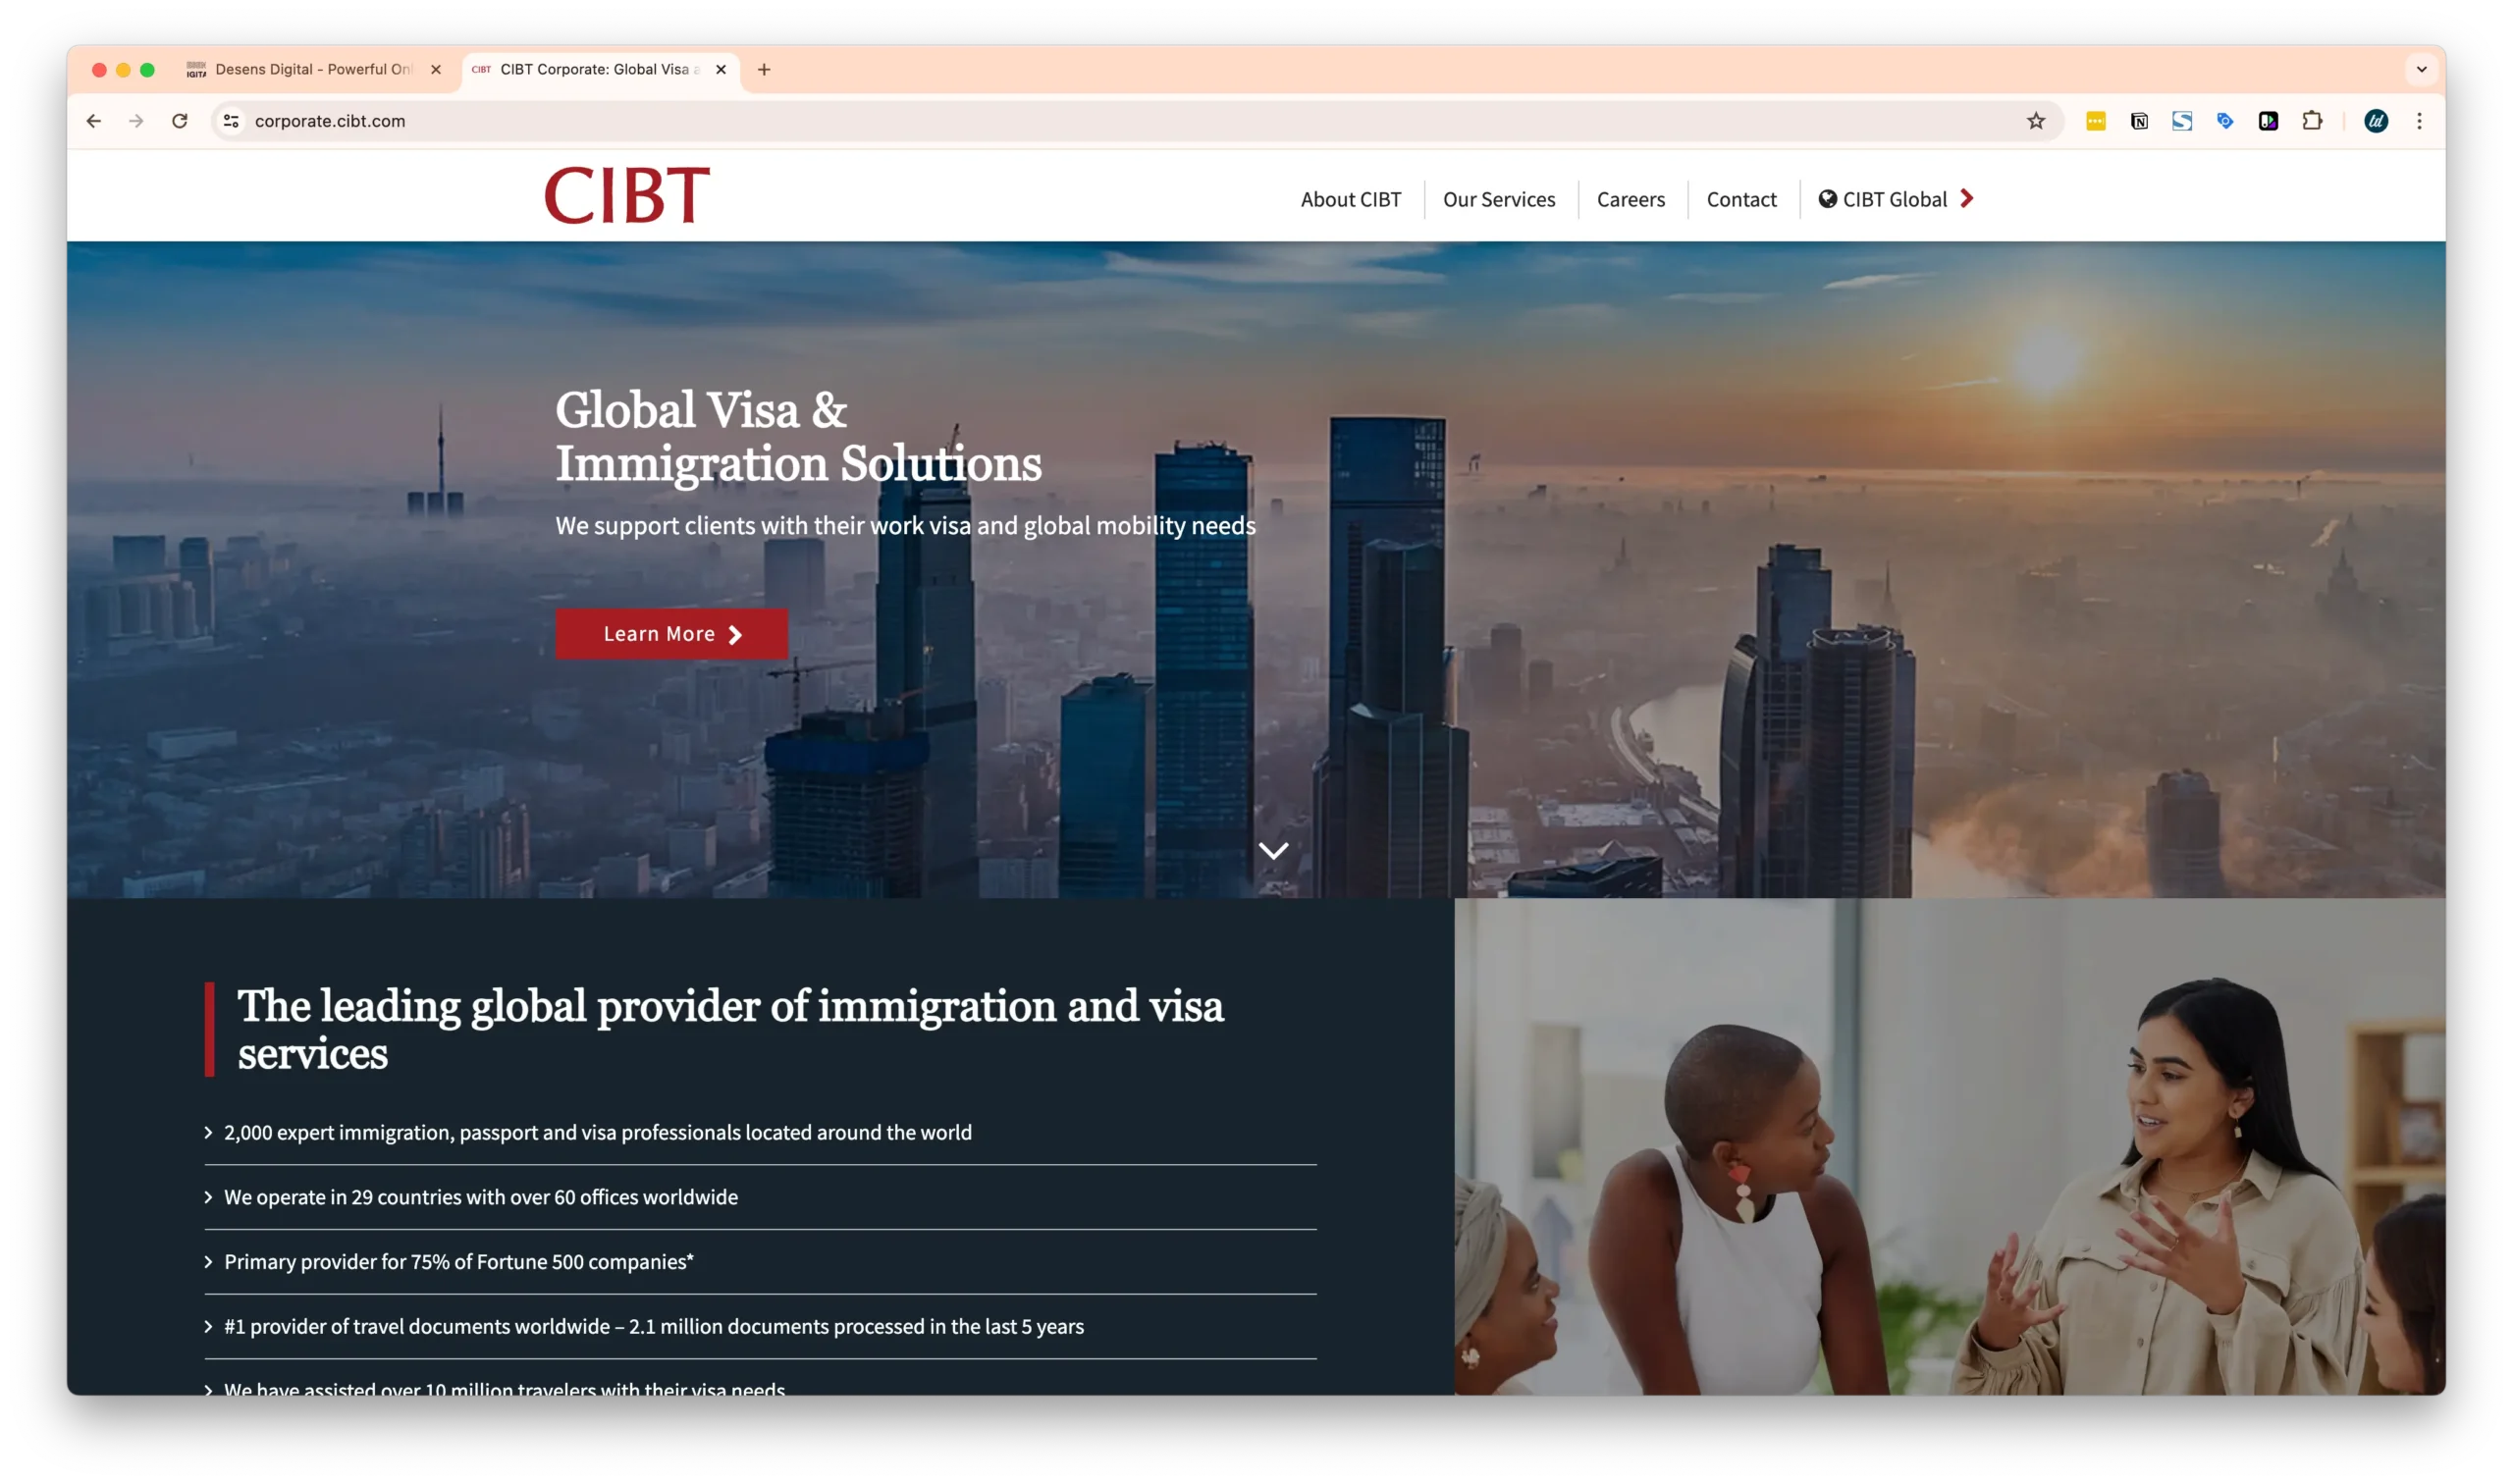 A webpage for CIBT, a company offering global visa and immigration solutions, featuring a city skyline at sunrise. The text highlights their services and credentials, with a "Learn More" button. An image shows a diverse group of people in a discussion.